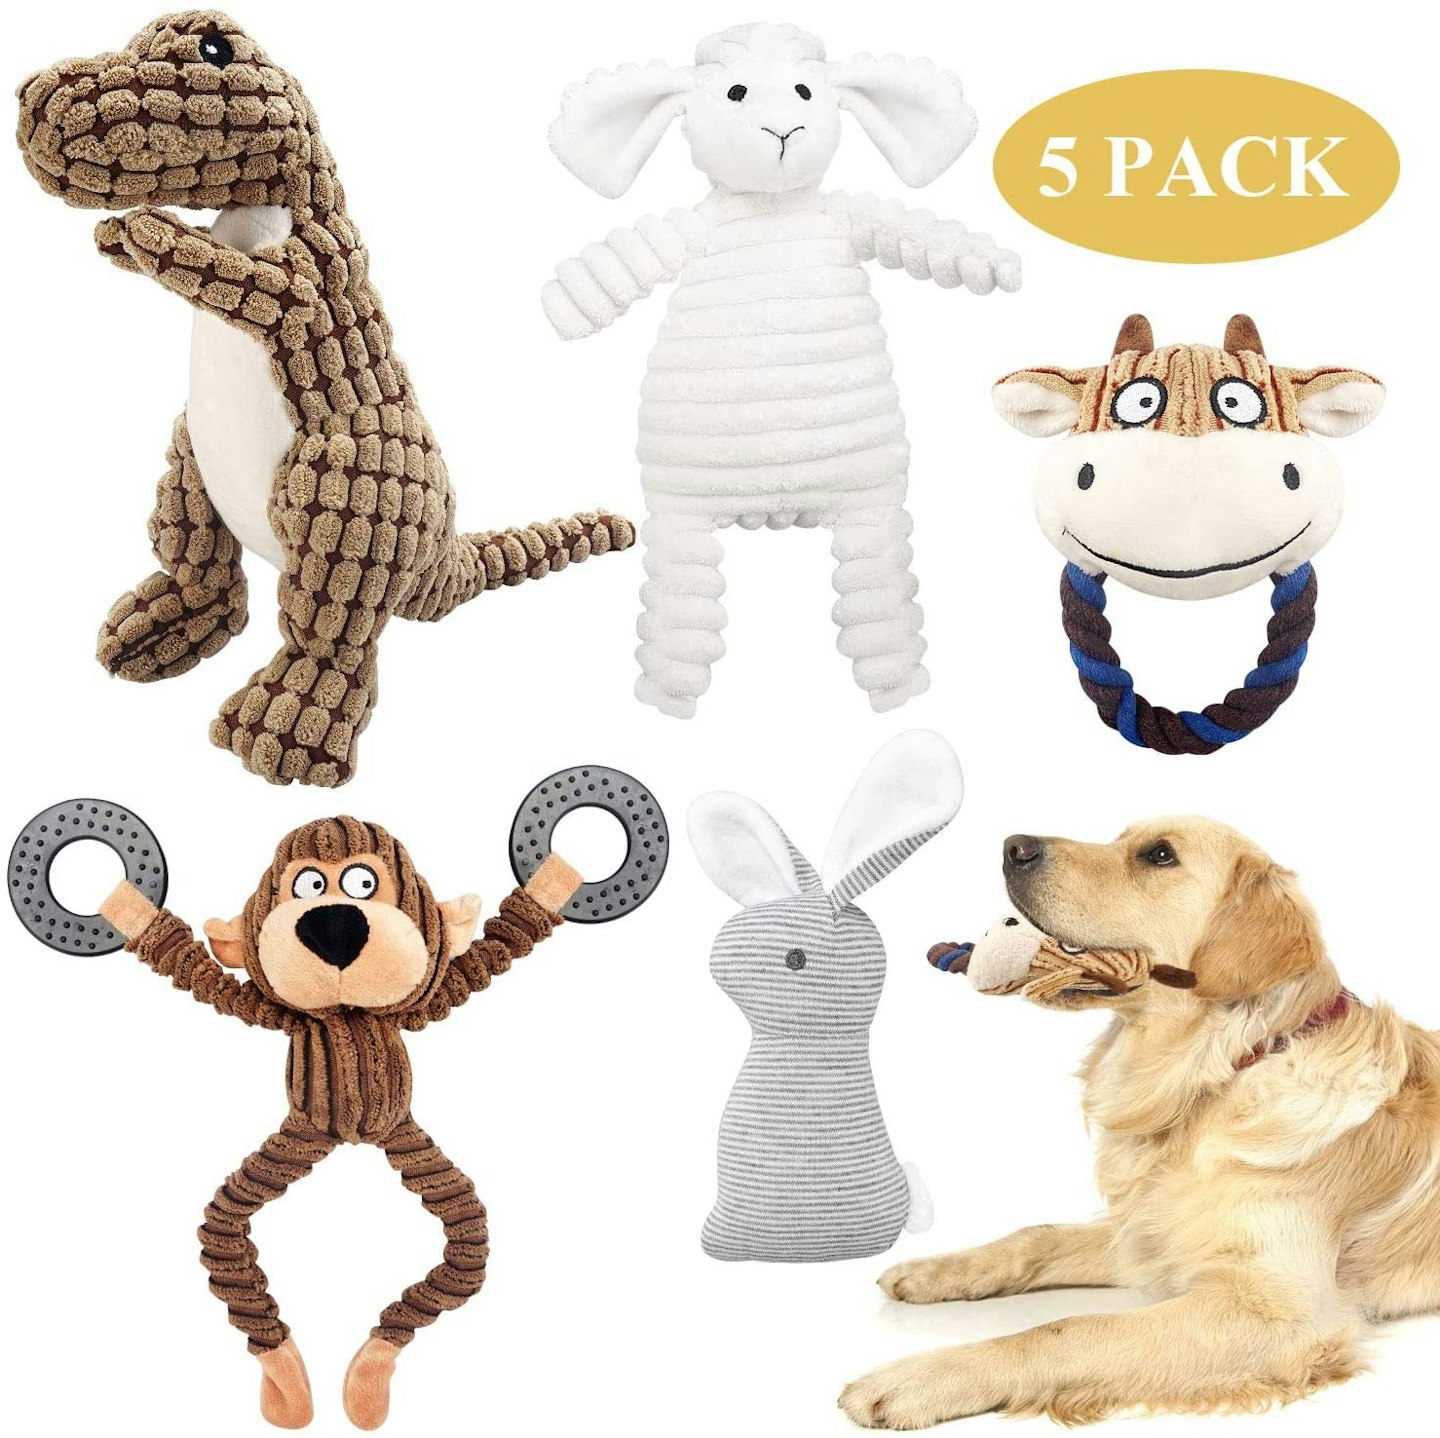 KONKY Squeaky Dog Toys Set, 5 Pack